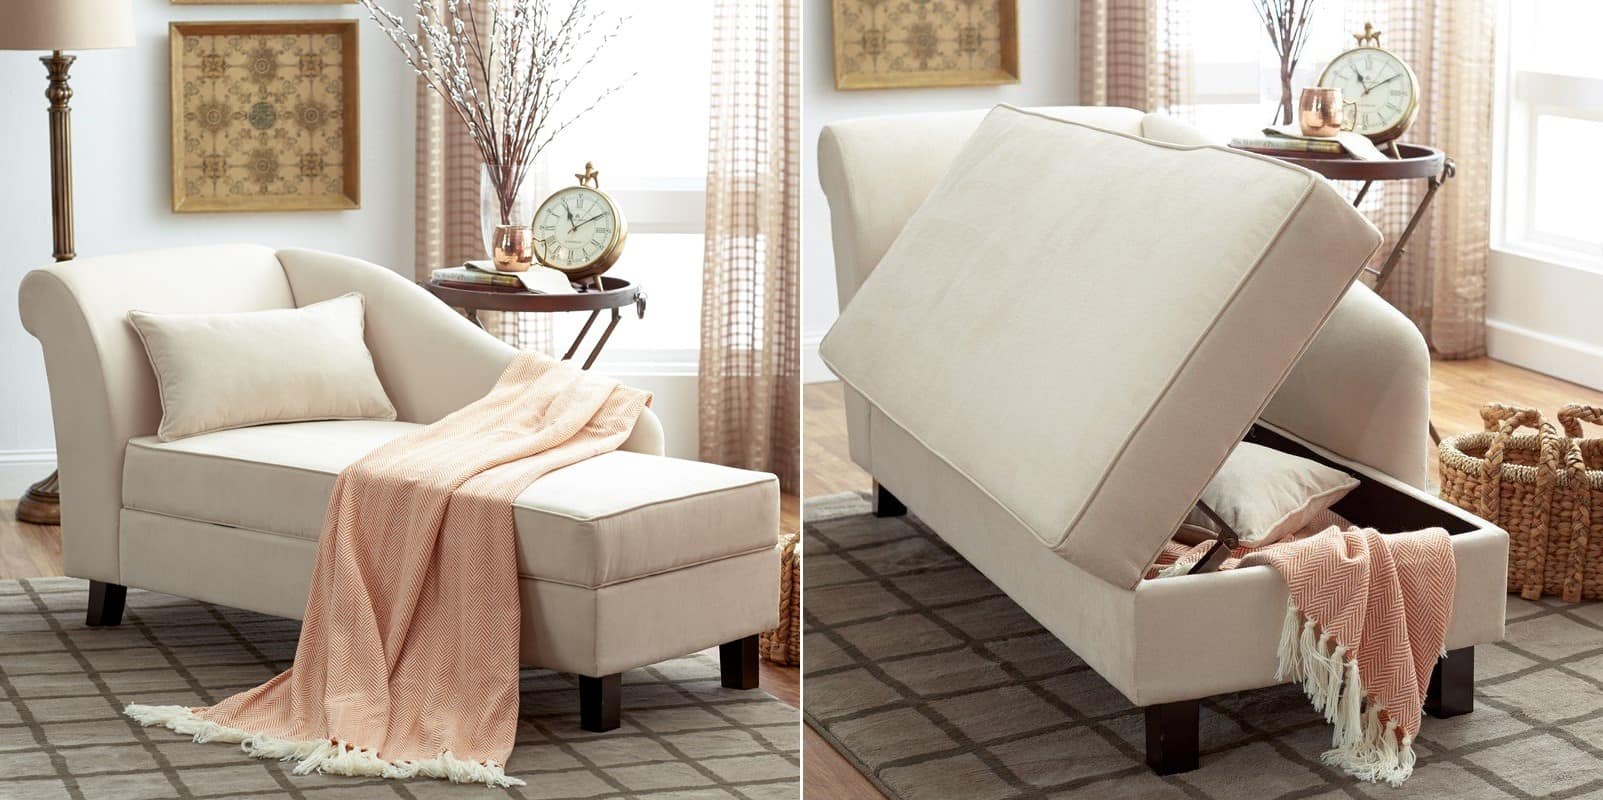 A Solo Chaise Lounge with Storage